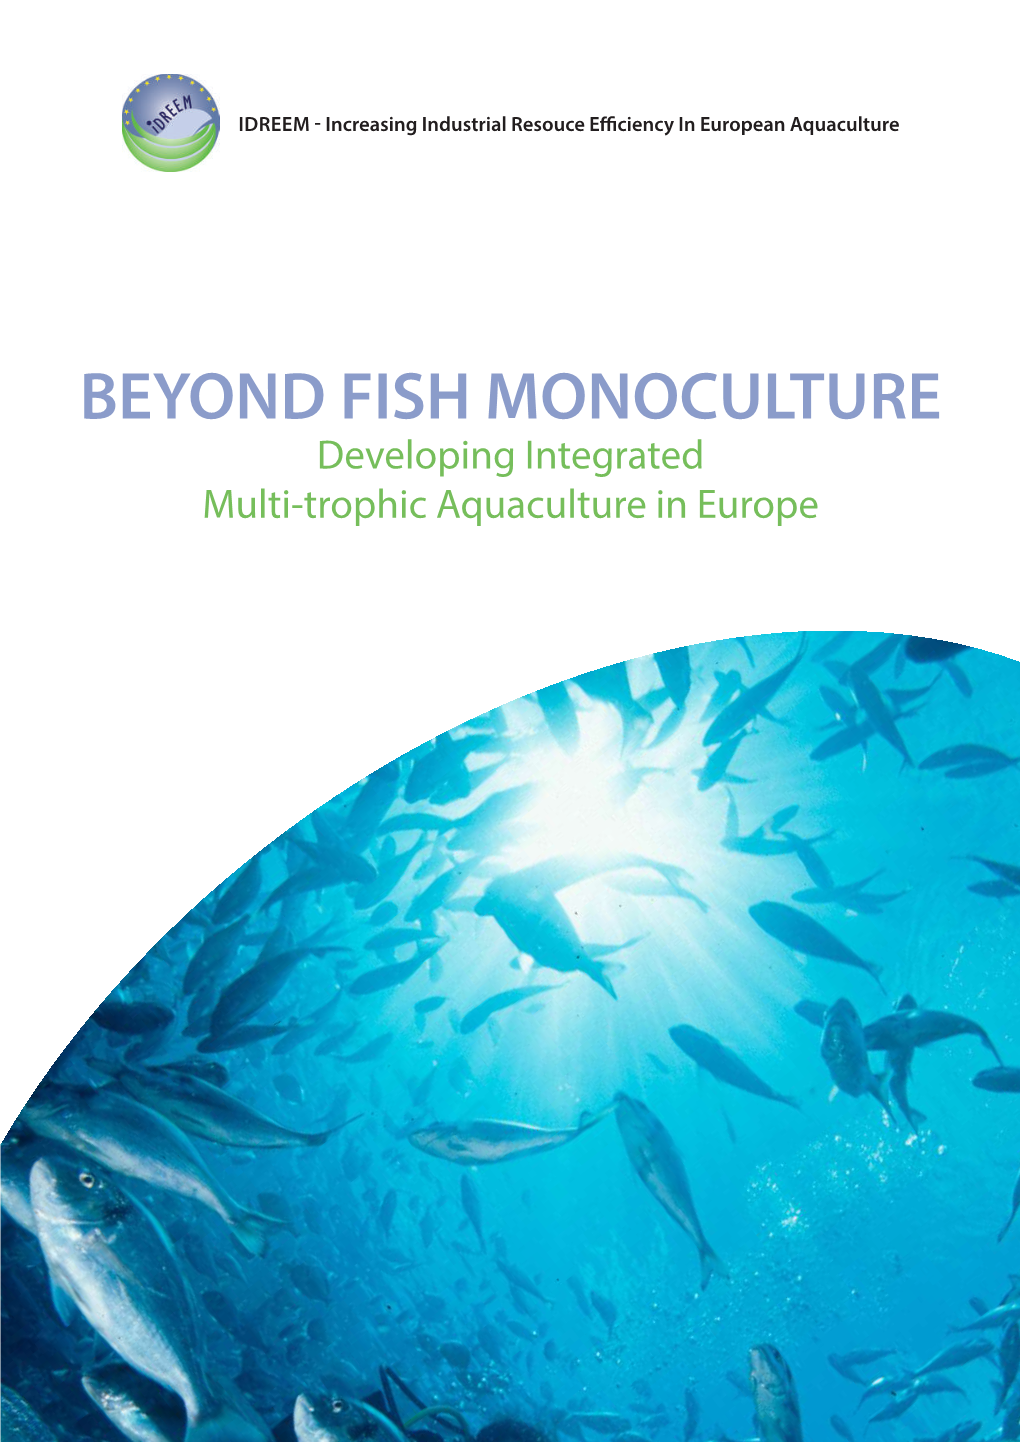 BEYOND FISH MONOCULTURE Developing Integrated Multi-Trophic Aquaculture in Europe